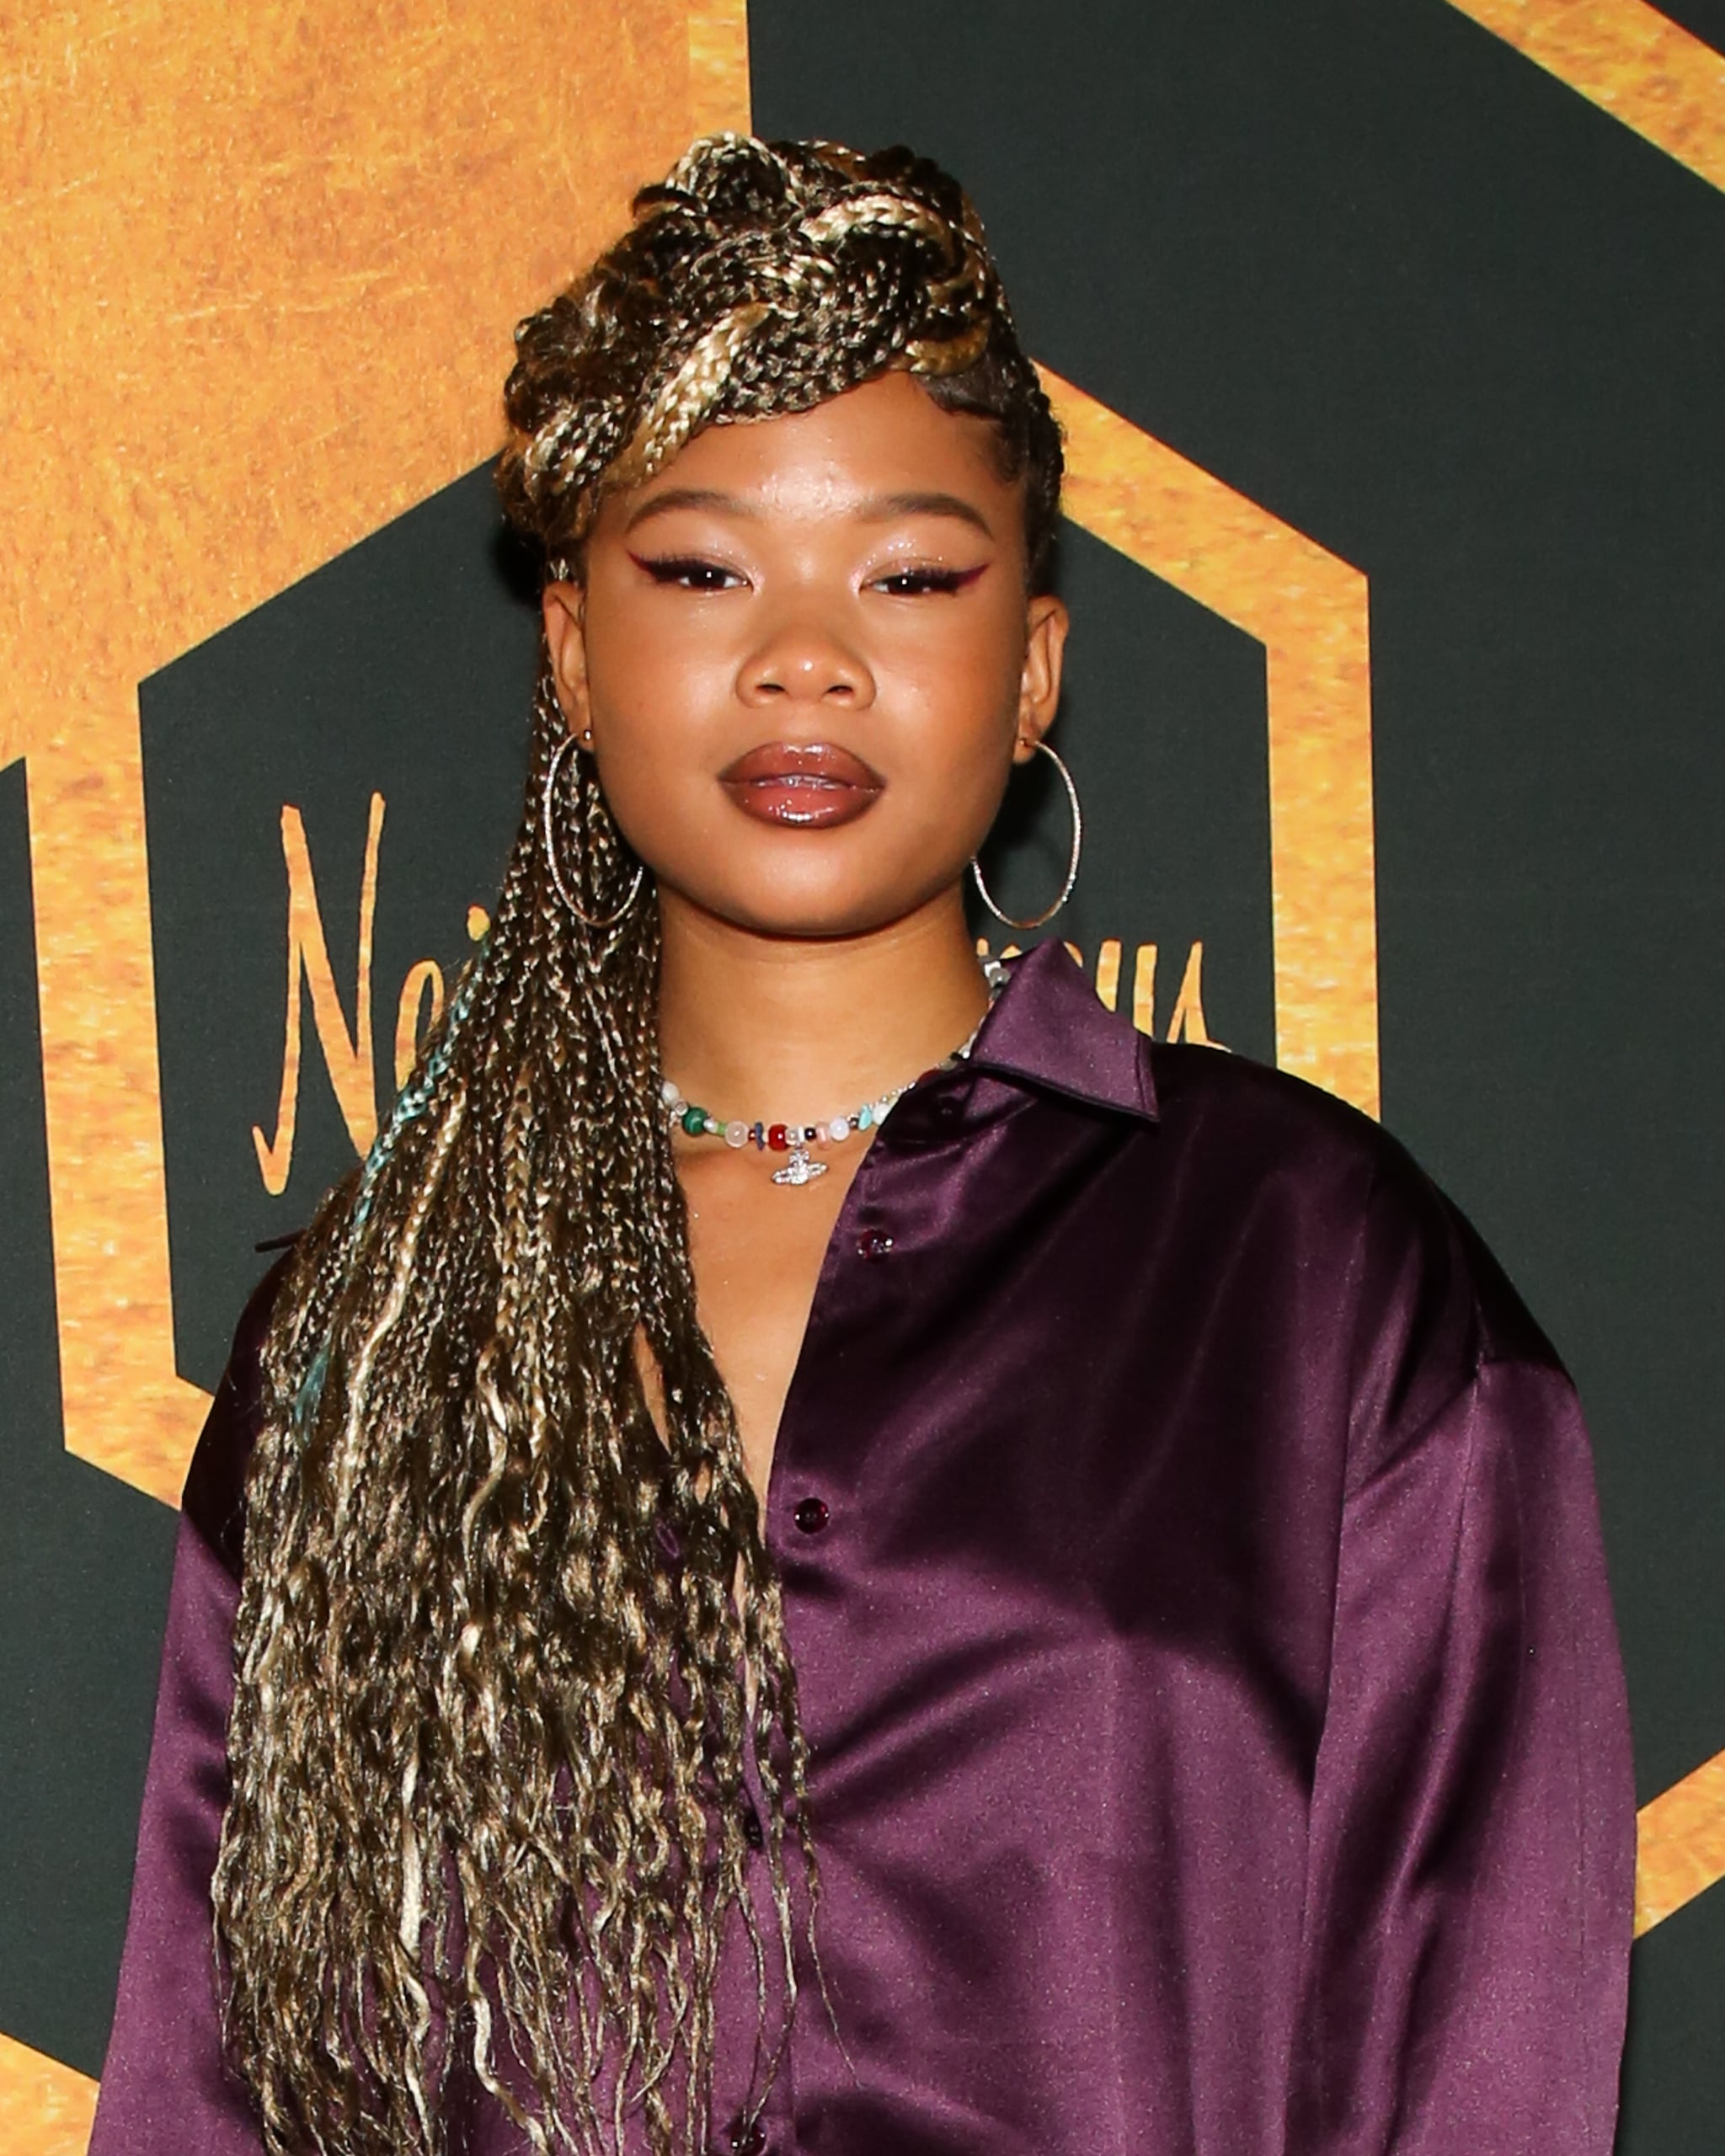 WEST HOLLYWOOD, CALIFORNIA - JULY 20: Actress Storm Reid attends the Stephen Curry 2022 ESPYs celebration at LAVO Ristorante on July 20, 2022 in West Hollywood, California. (Photo by Paul Archuleta/Getty Images)